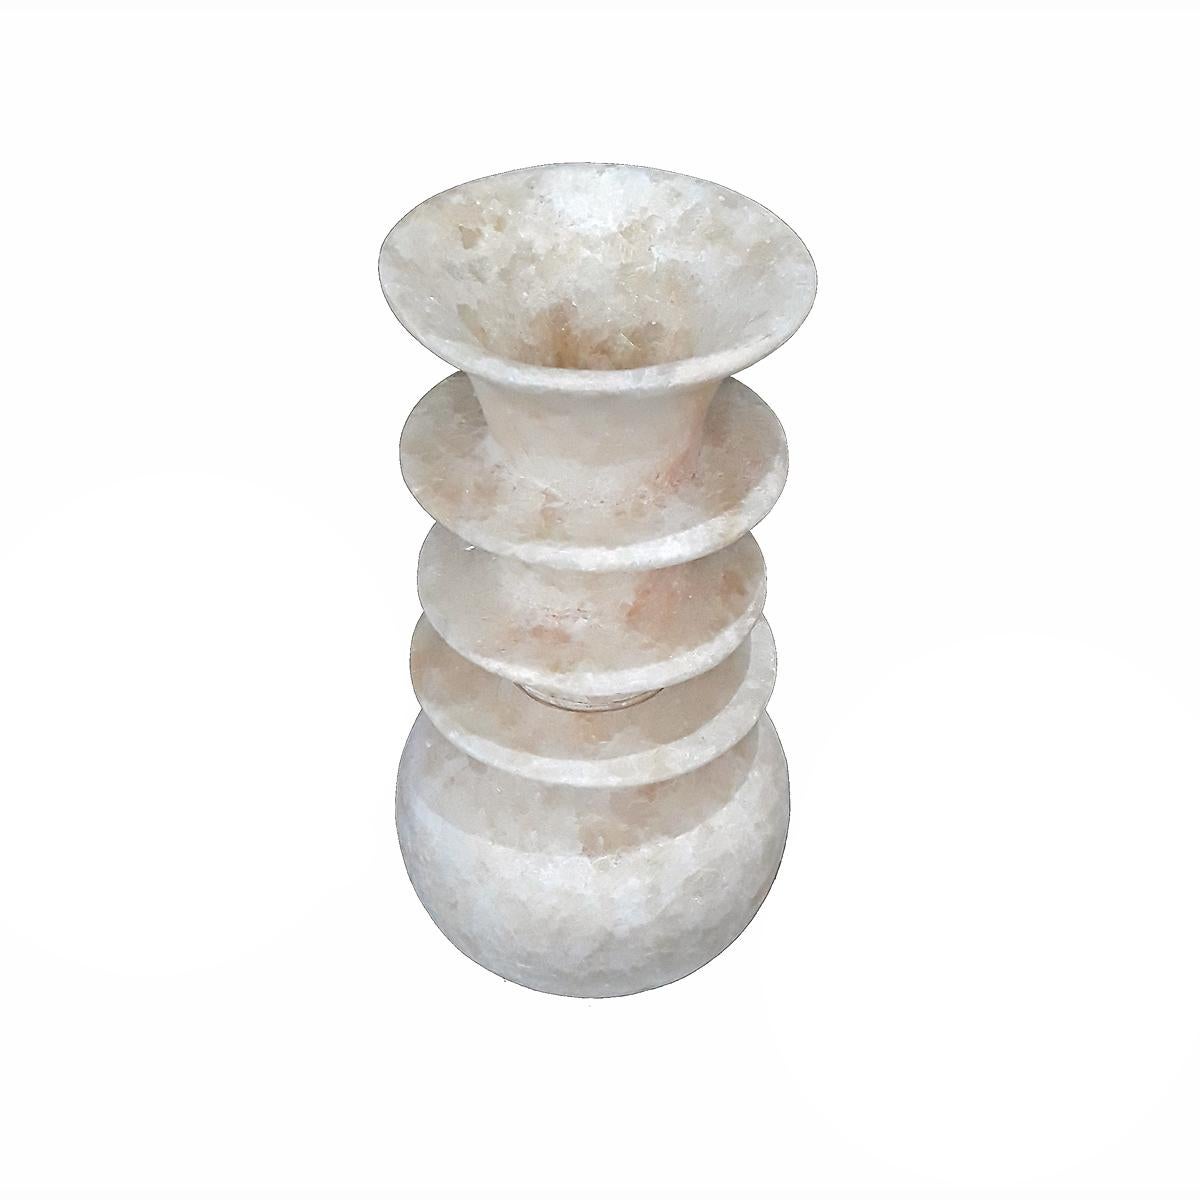 An alabaster vase, hand-crafted in Luxor, Egypt. Two pieces, with a bottom opening at the base. It allows the piece to be used as a lamp or screen for low-intensity lights (professional conversion recommended). 

The vase can be shipped in two